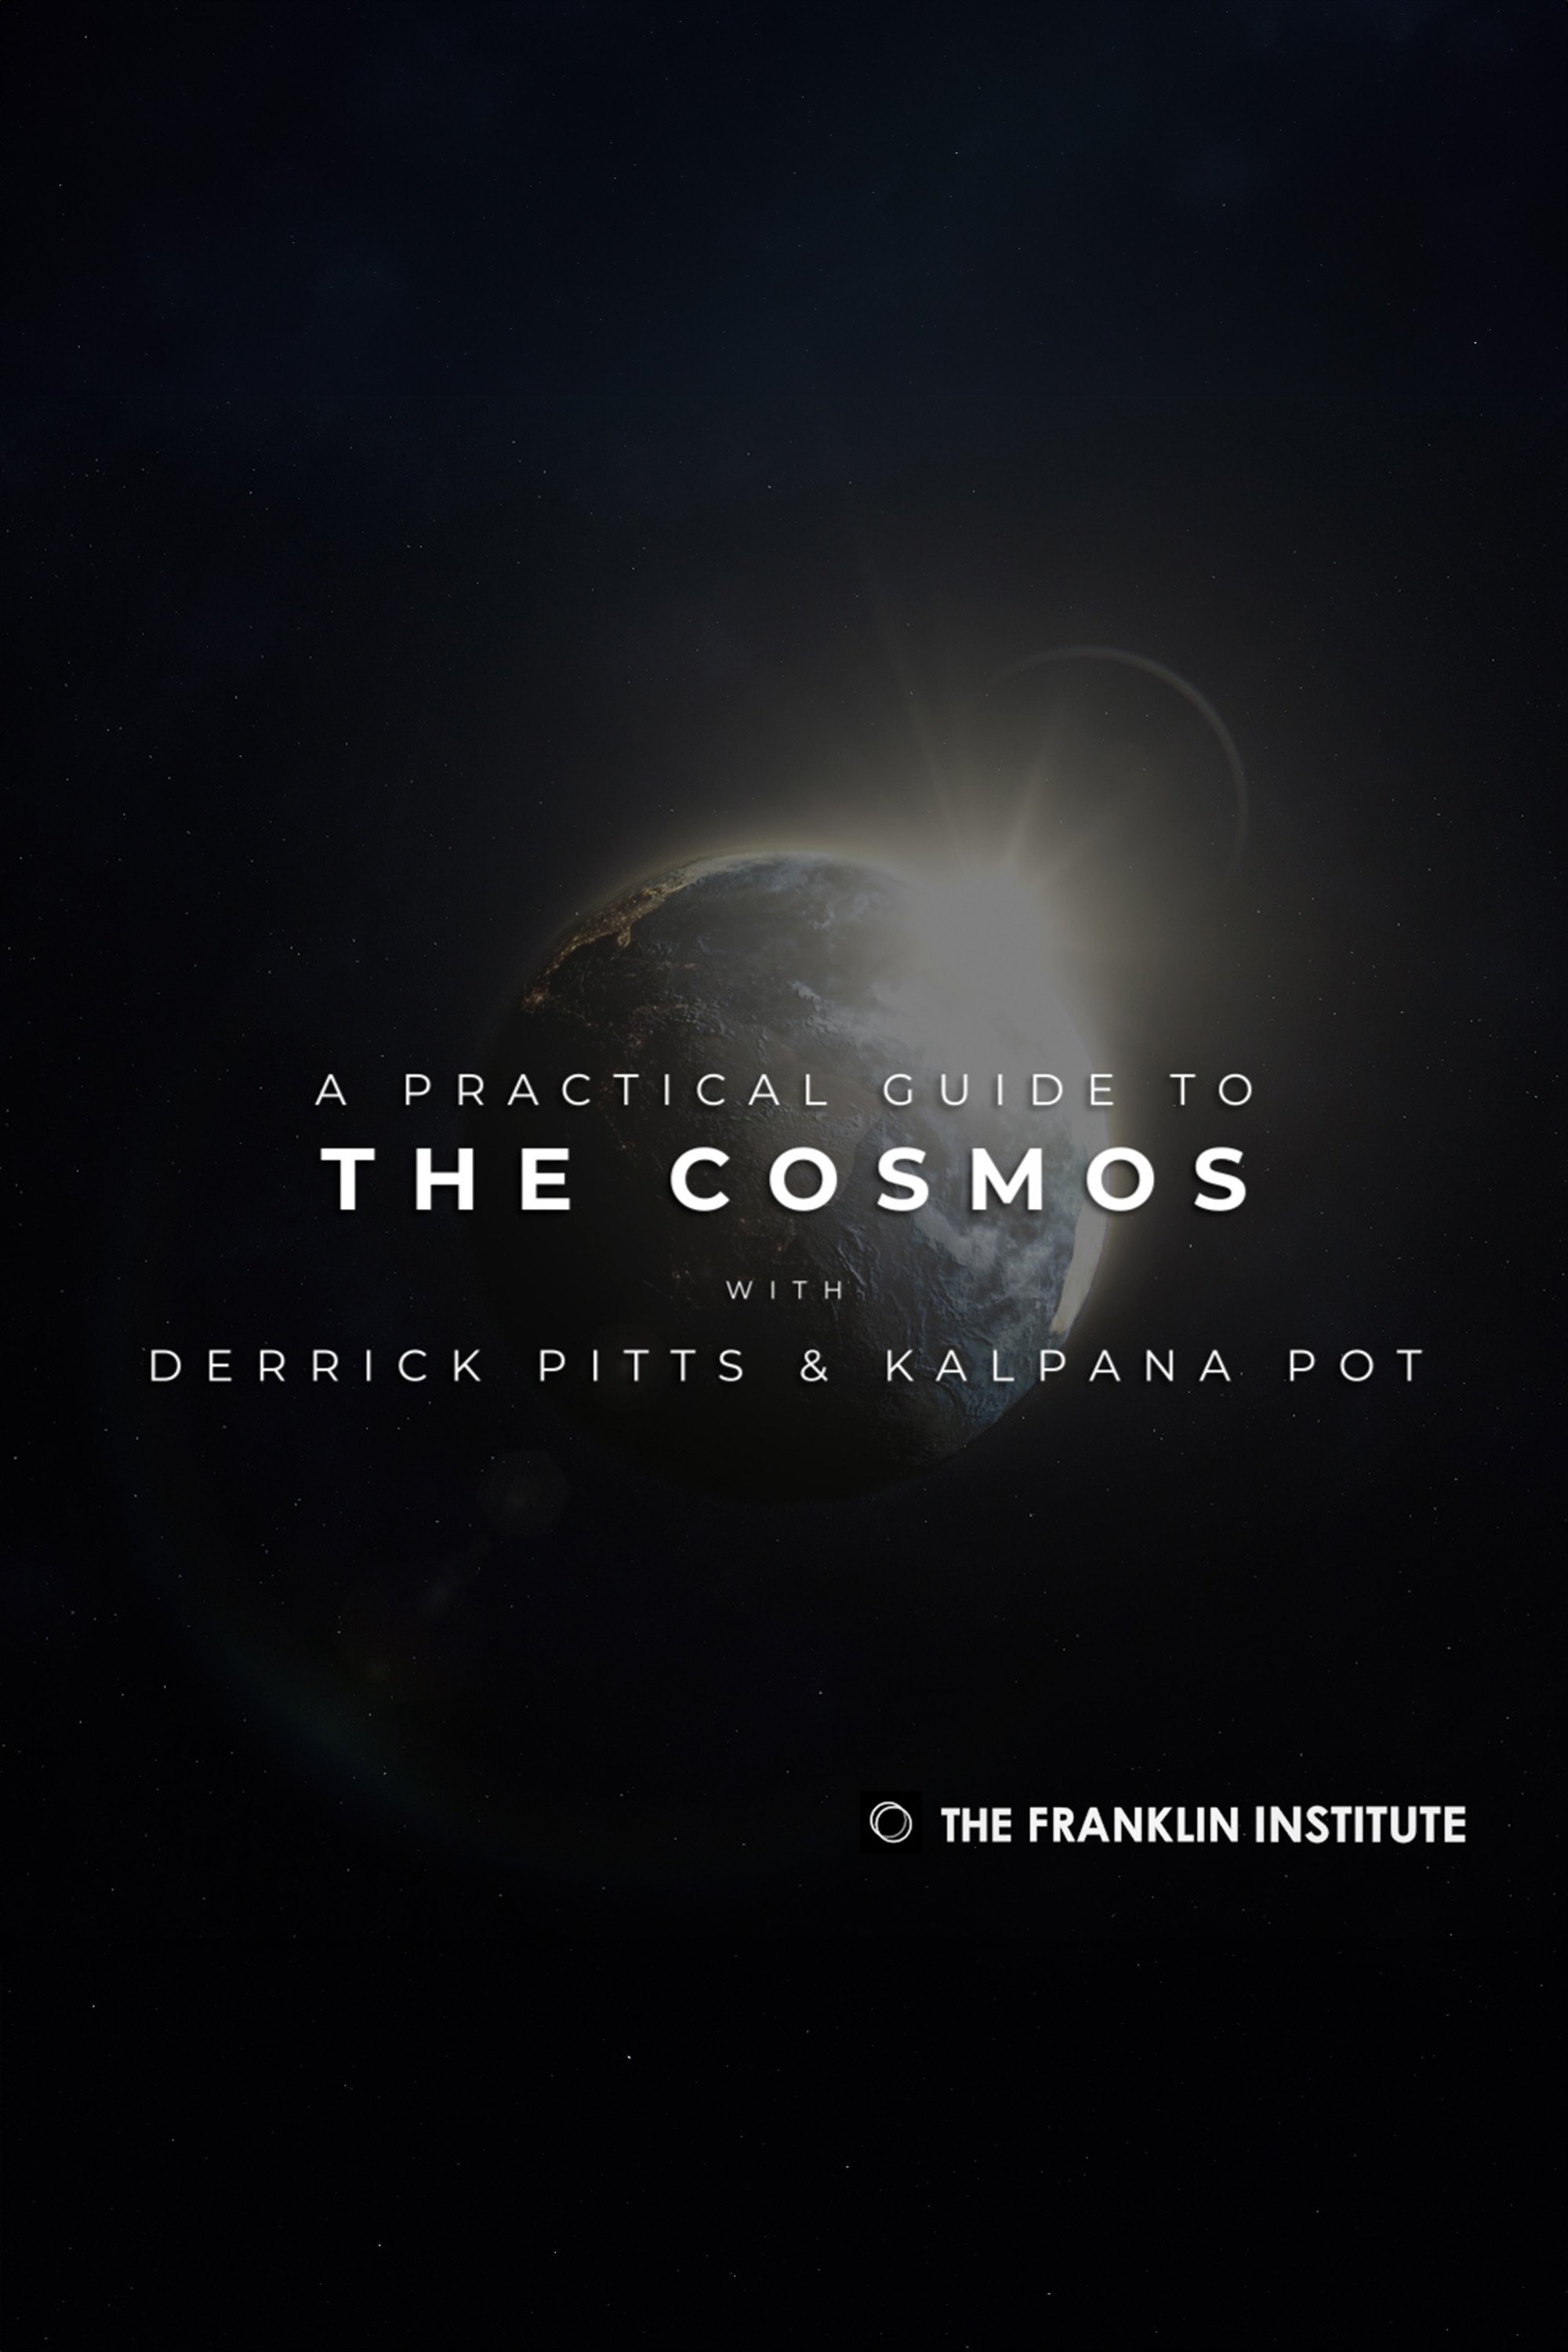 A Practical Guide to the Cosmos